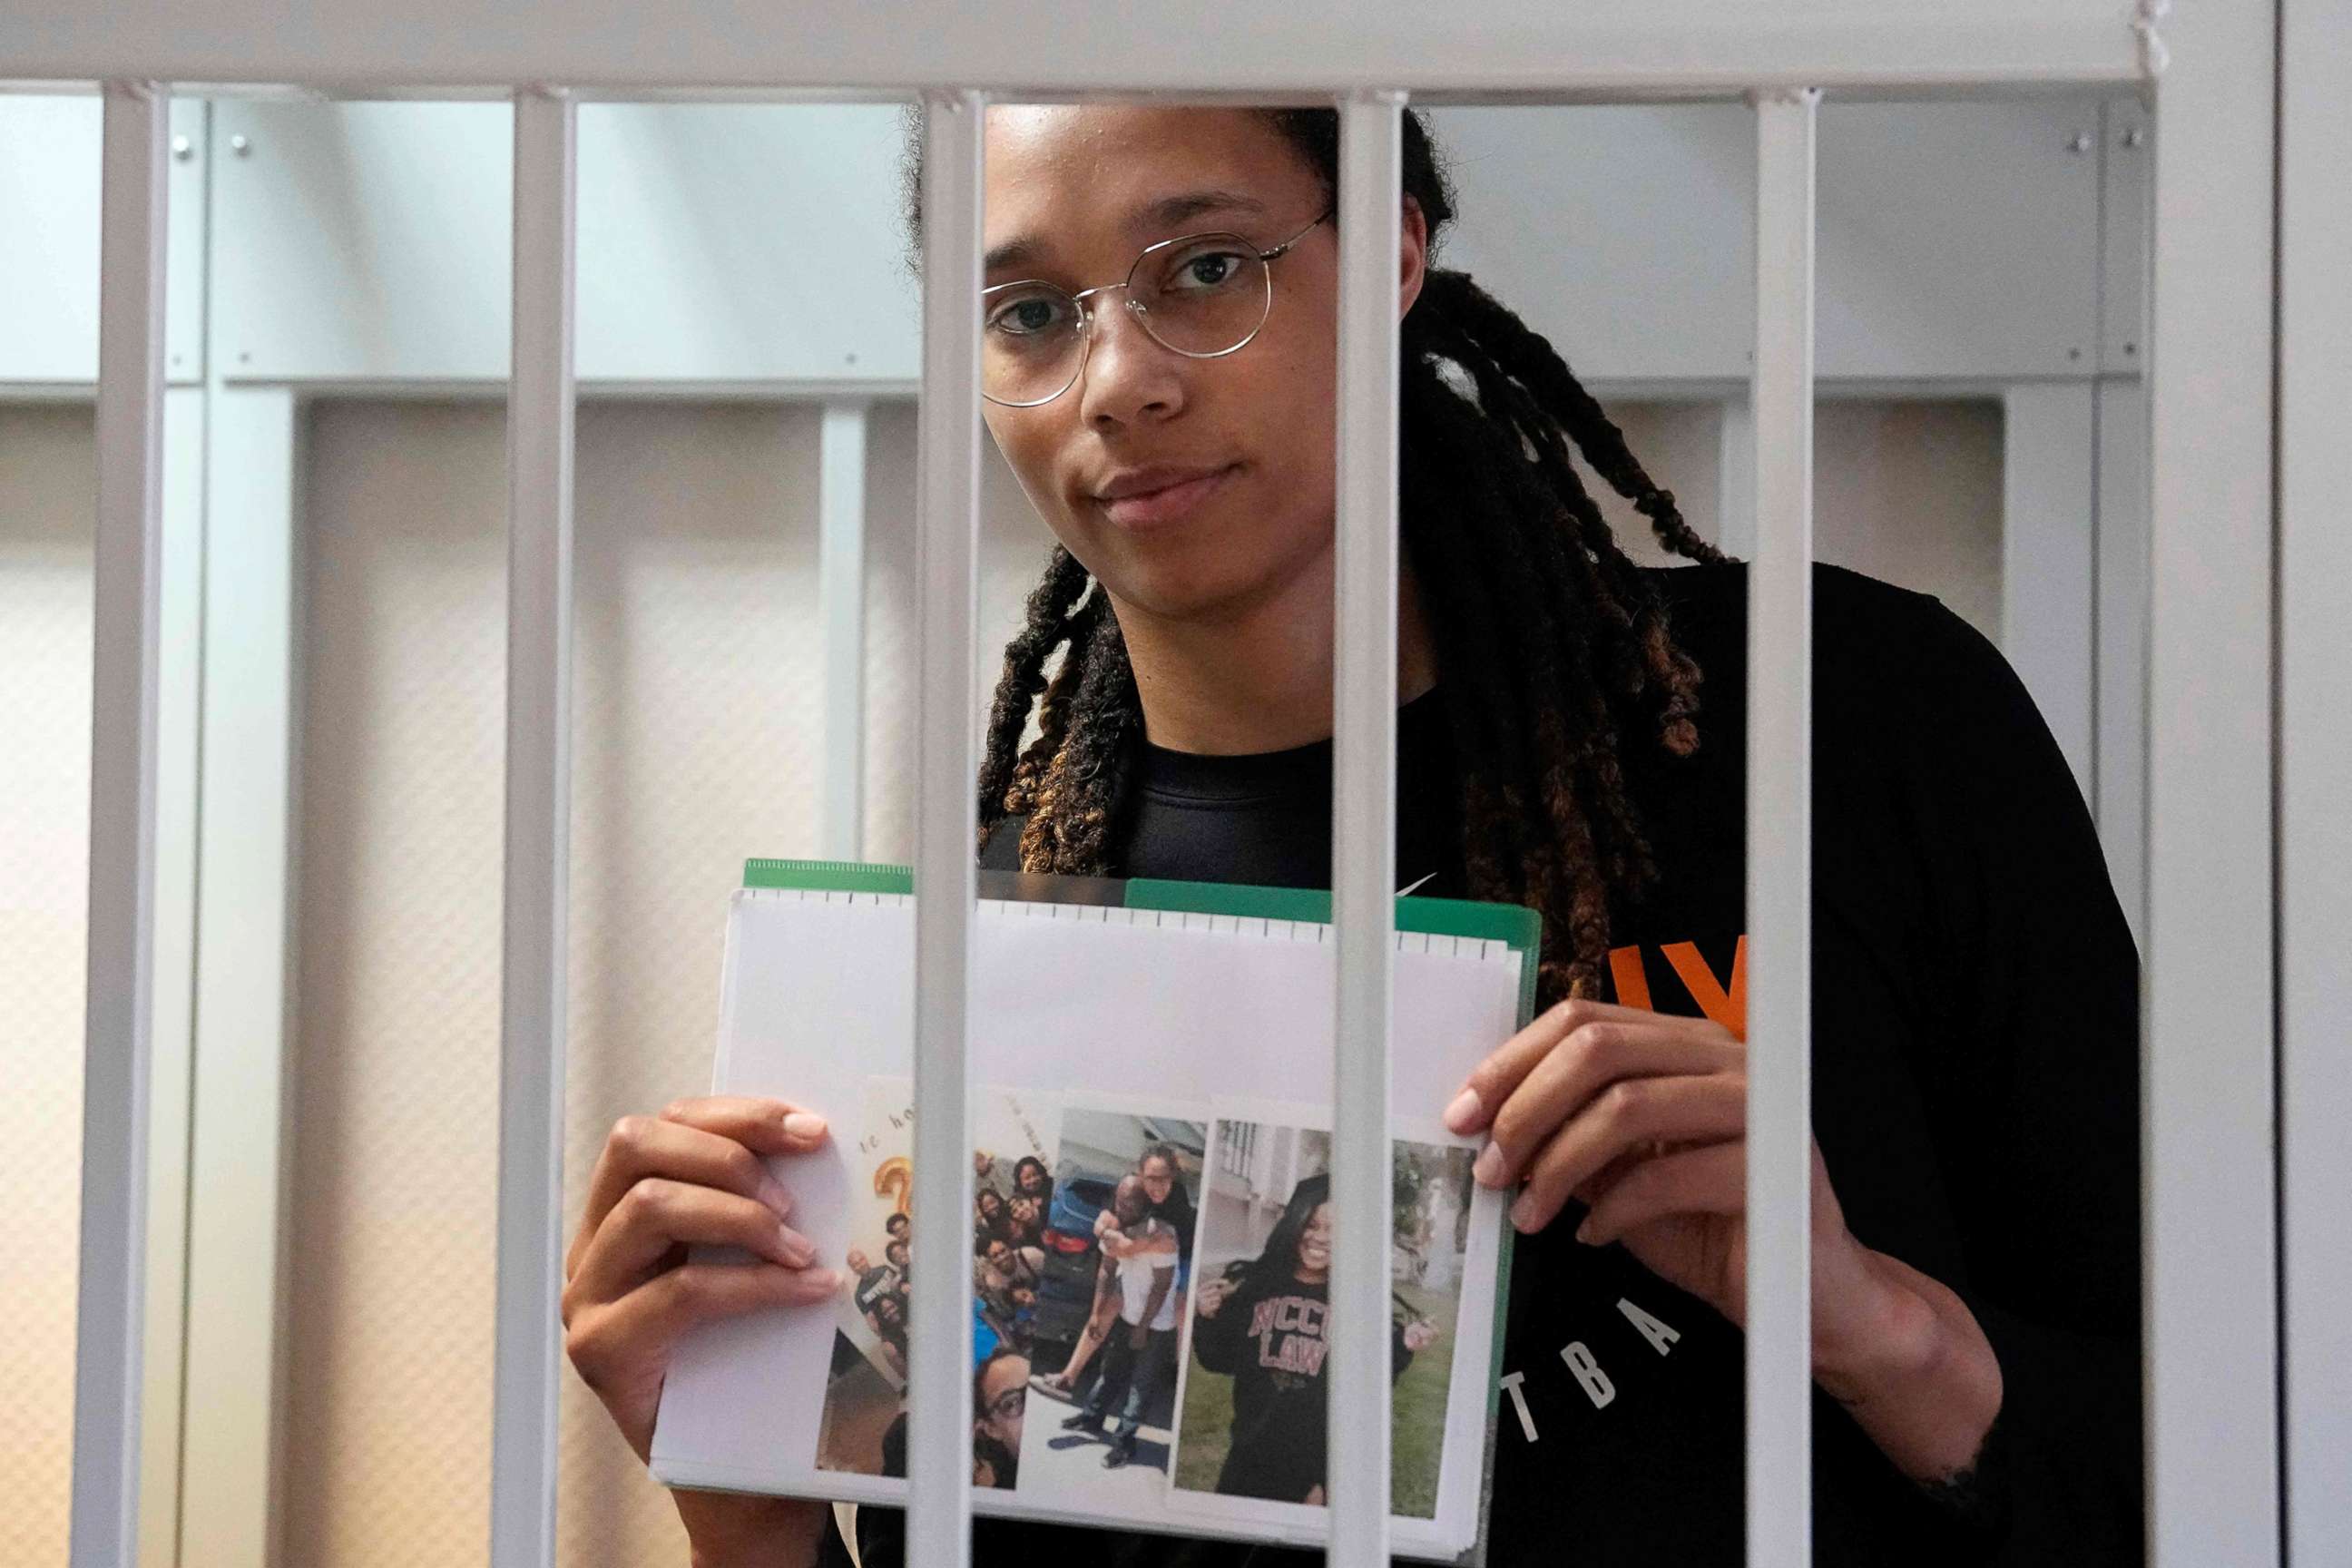 PHOTO: Olympian and WNBA basketball superstar Brittney Griner holds photographs standing inside a defendants' cage before a hearing at the Khimki Court, outside Moscow on July 27, 2022.